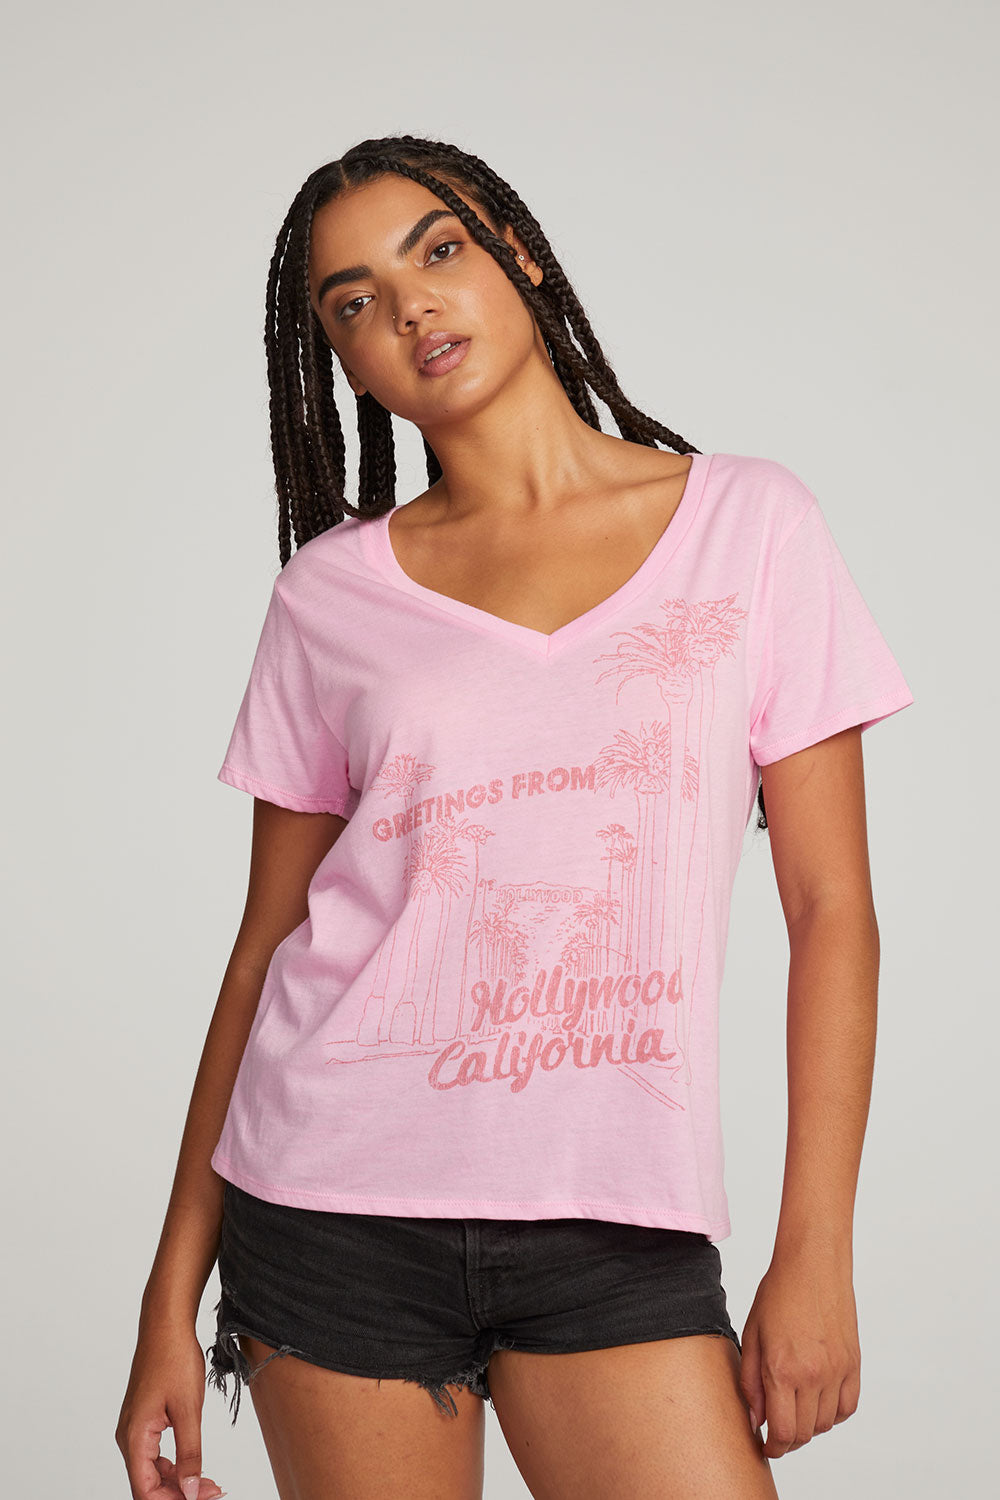 Hollywood Tee WOMENS chaserbrand